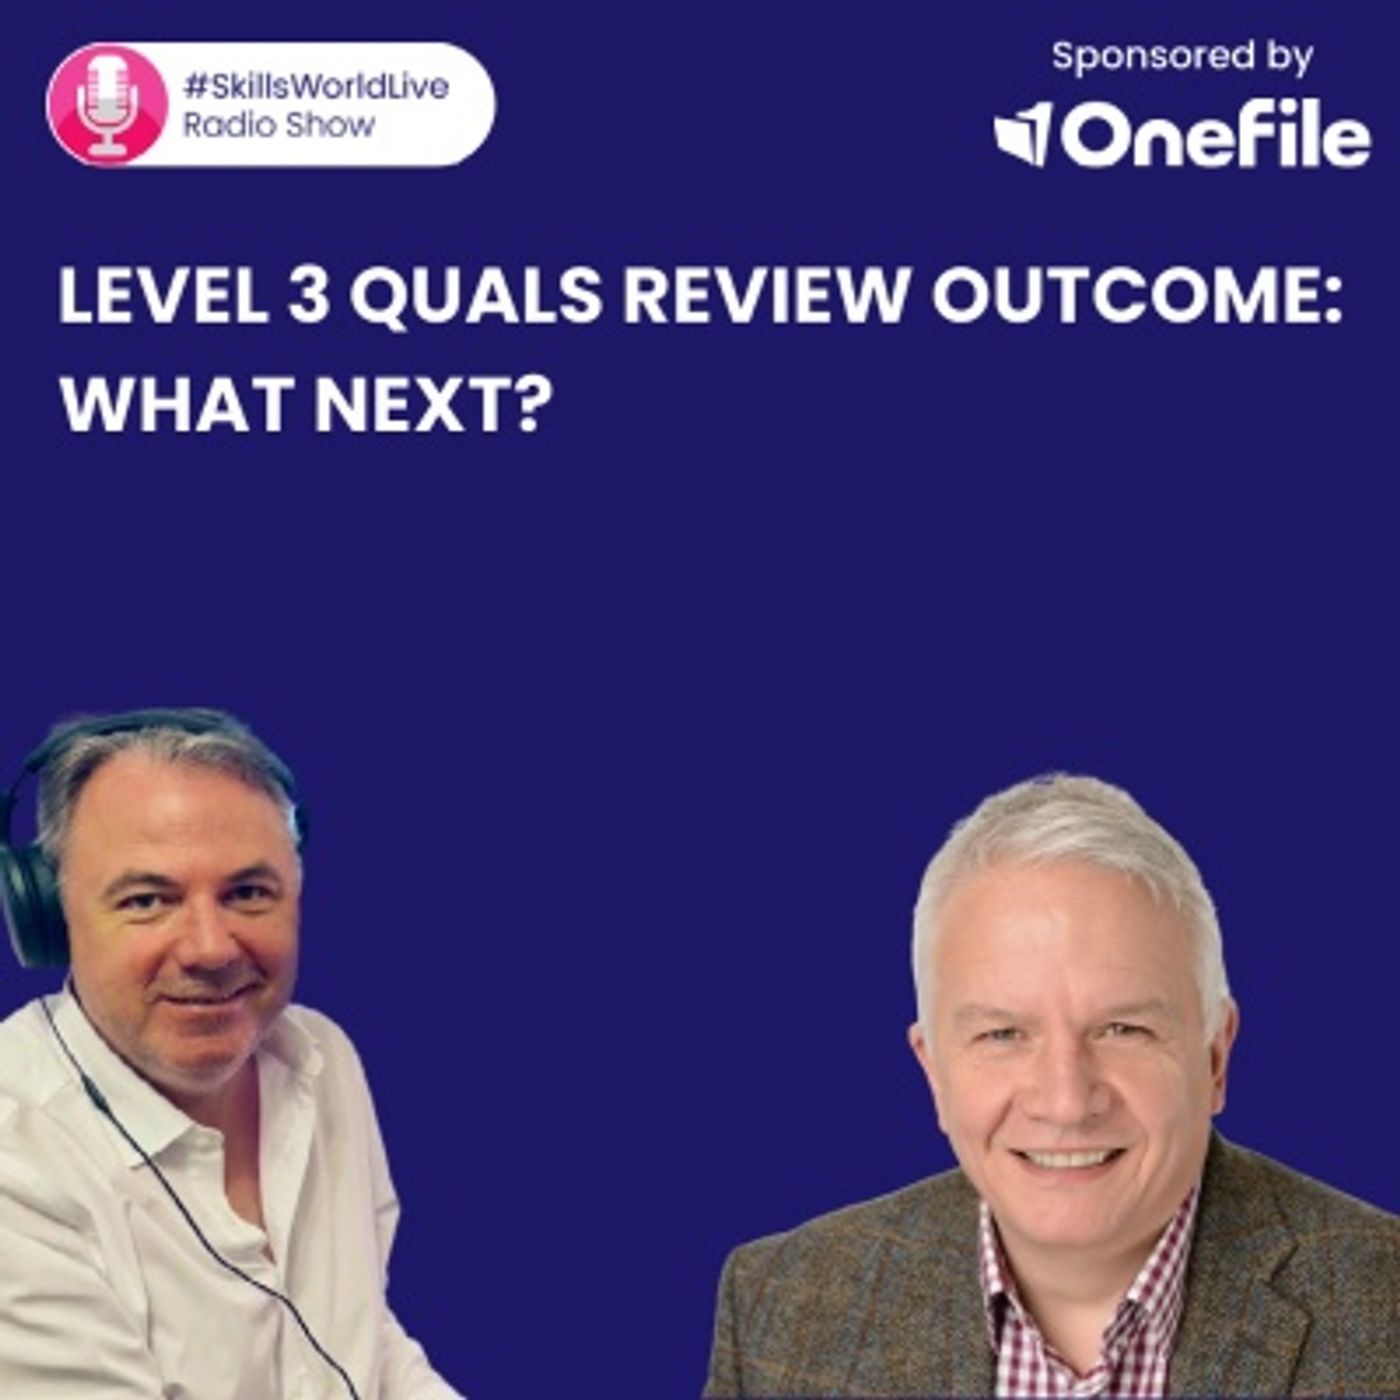 Level 3 quals review outcome: what next? #SkillsWorldLive 3.14